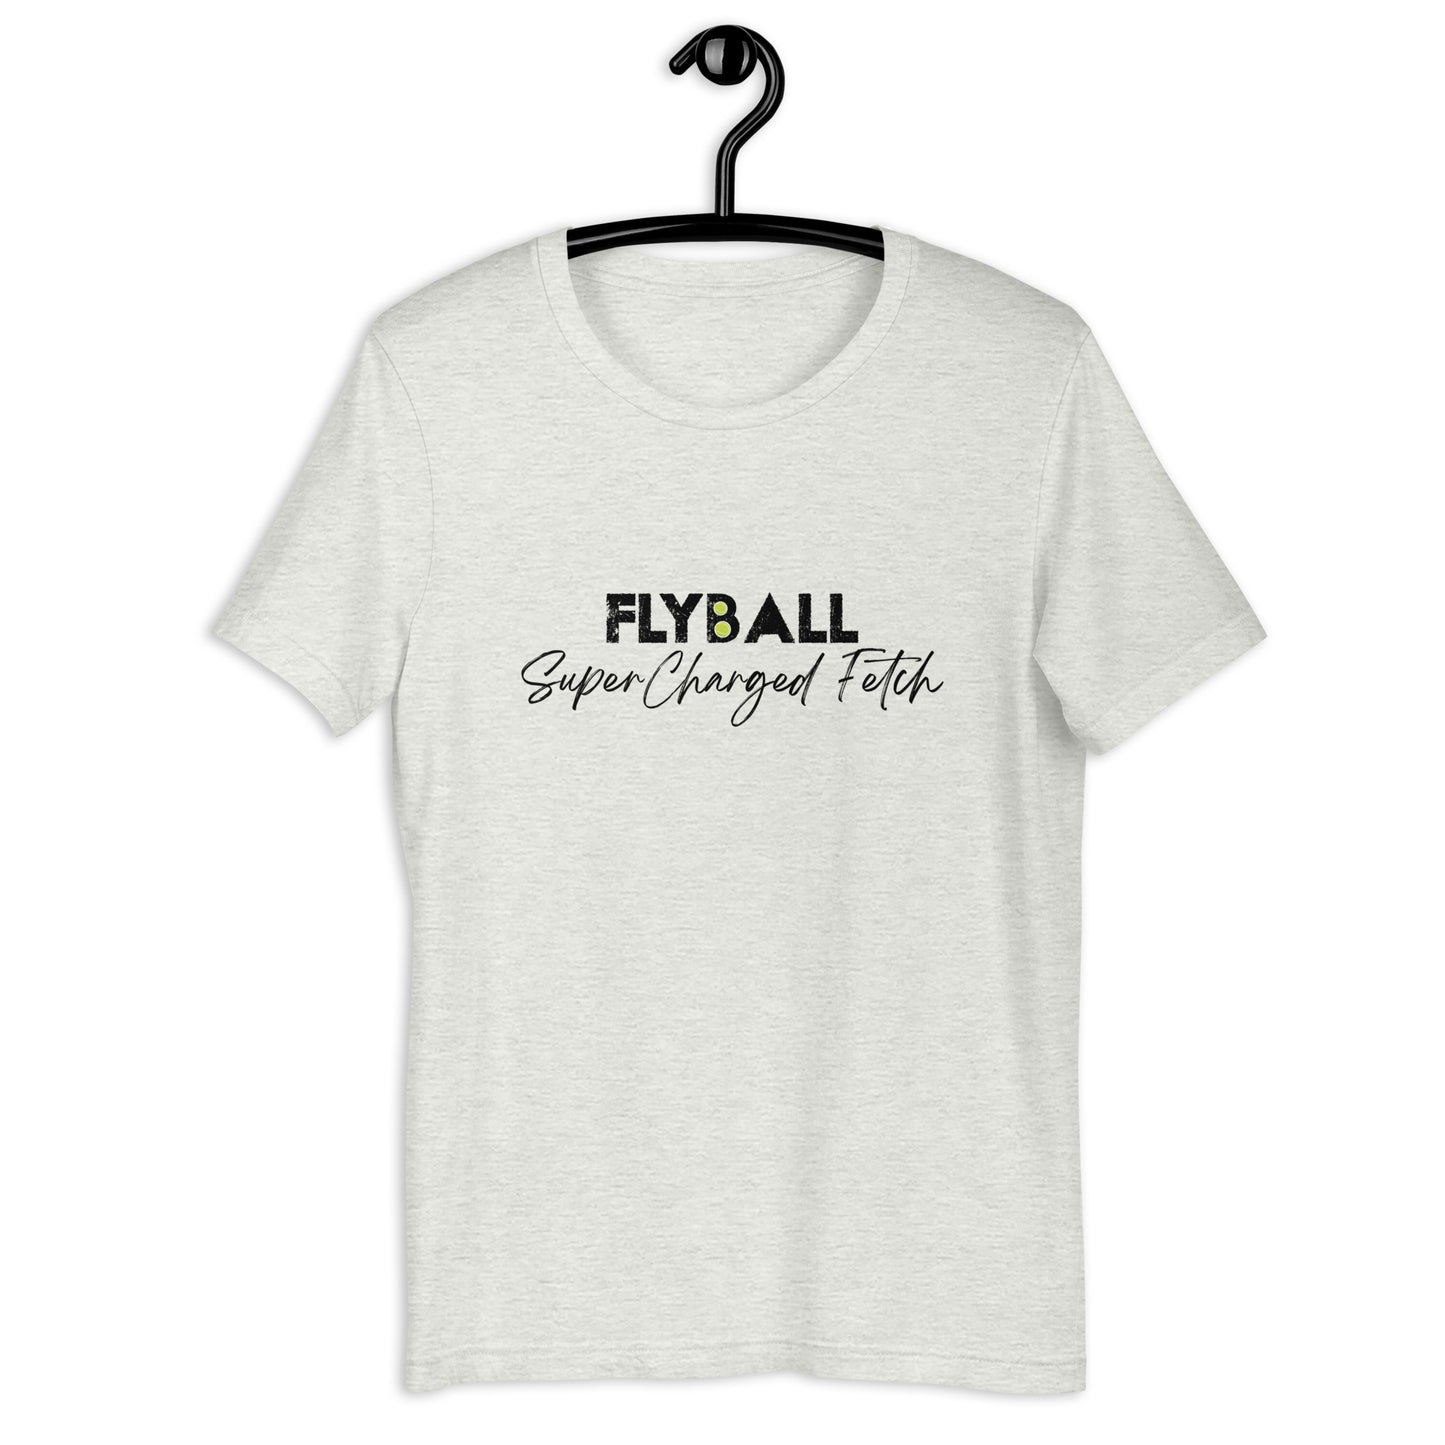 FLYBALL - Supercharged Fetch - Unisex t-shirt